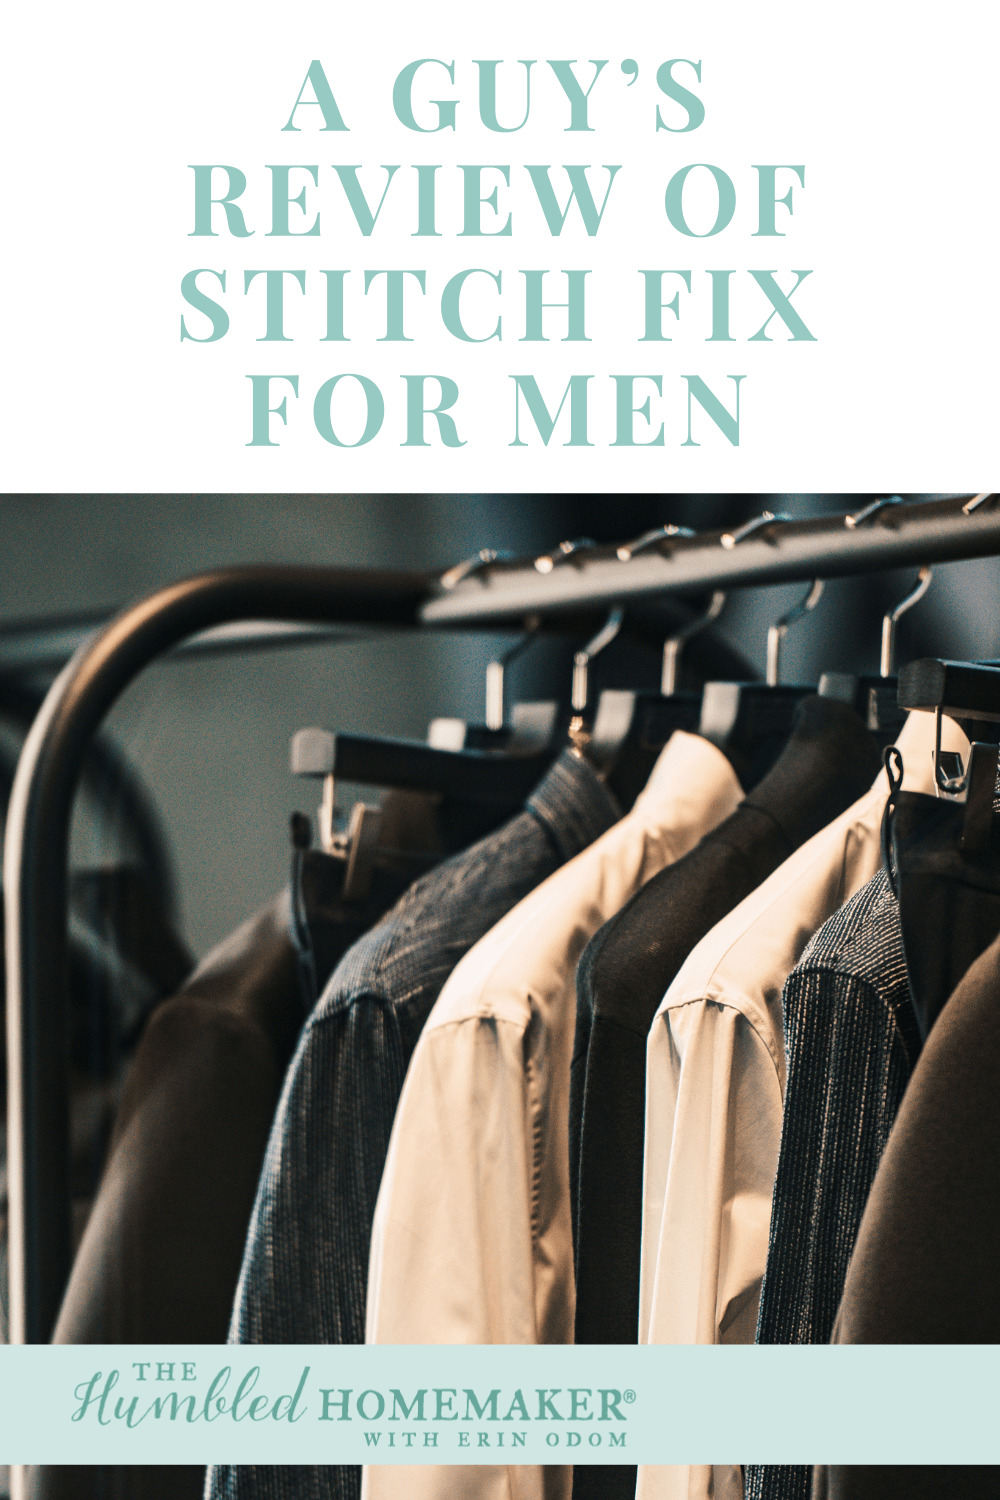 Ready for a guy’s review of Stitch Fix for Men? There are thousands of posts on the internet about women using Stitch Fix, but what about a men’s take on Stitch Fix for Men. Read on, and discover if this might be a viable option for helping your husband build a new wardrobe–with style! 